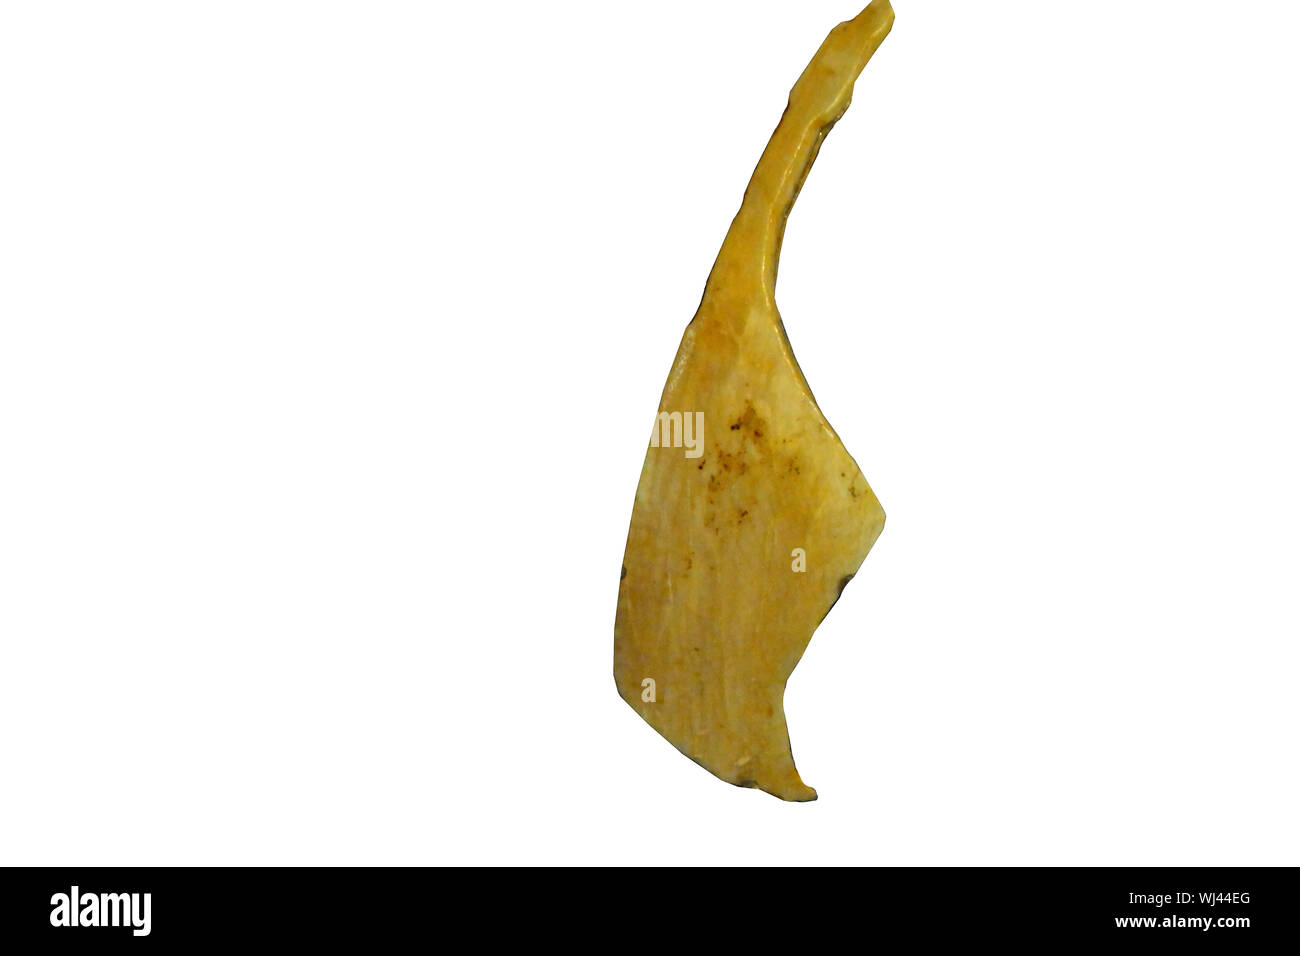 A Figurine shaped from a wild boar's tusk, supposedly representing a woman dating back 15,000 years. Isolated against a white background Stock Photo